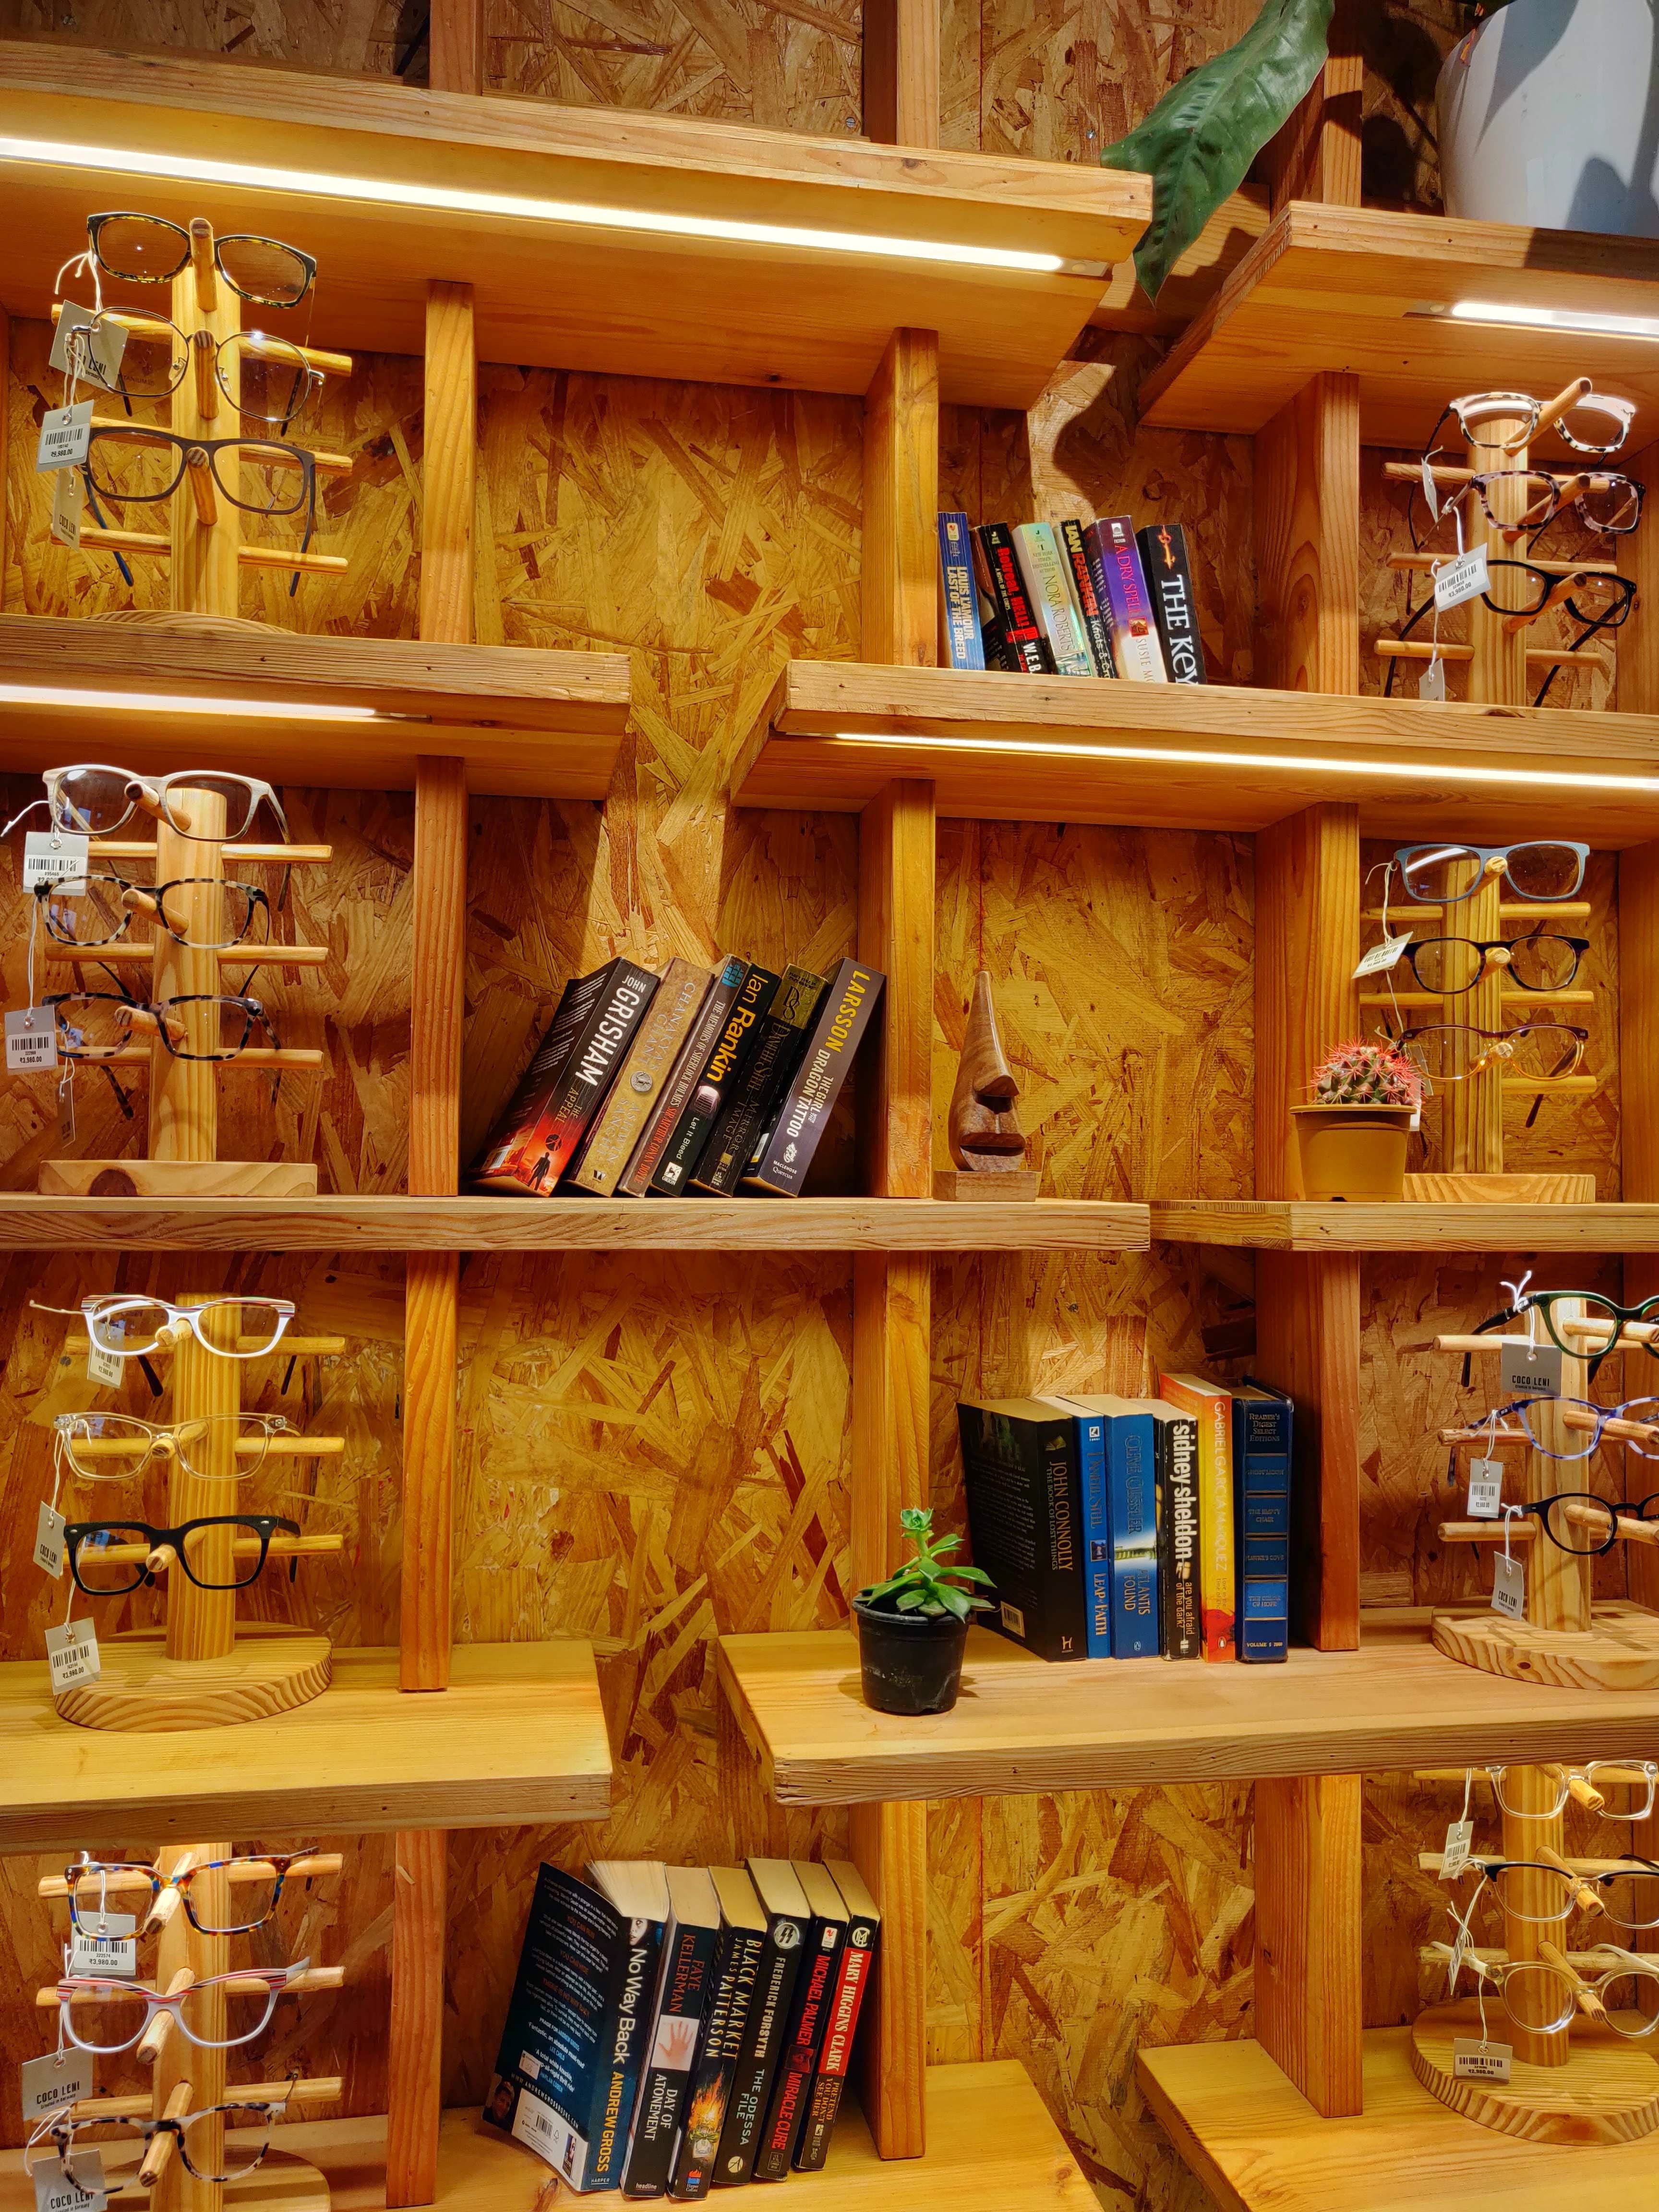 Shelf,Shelving,Furniture,Wood,Bookcase,Collection,Room,woodworking,Lumber